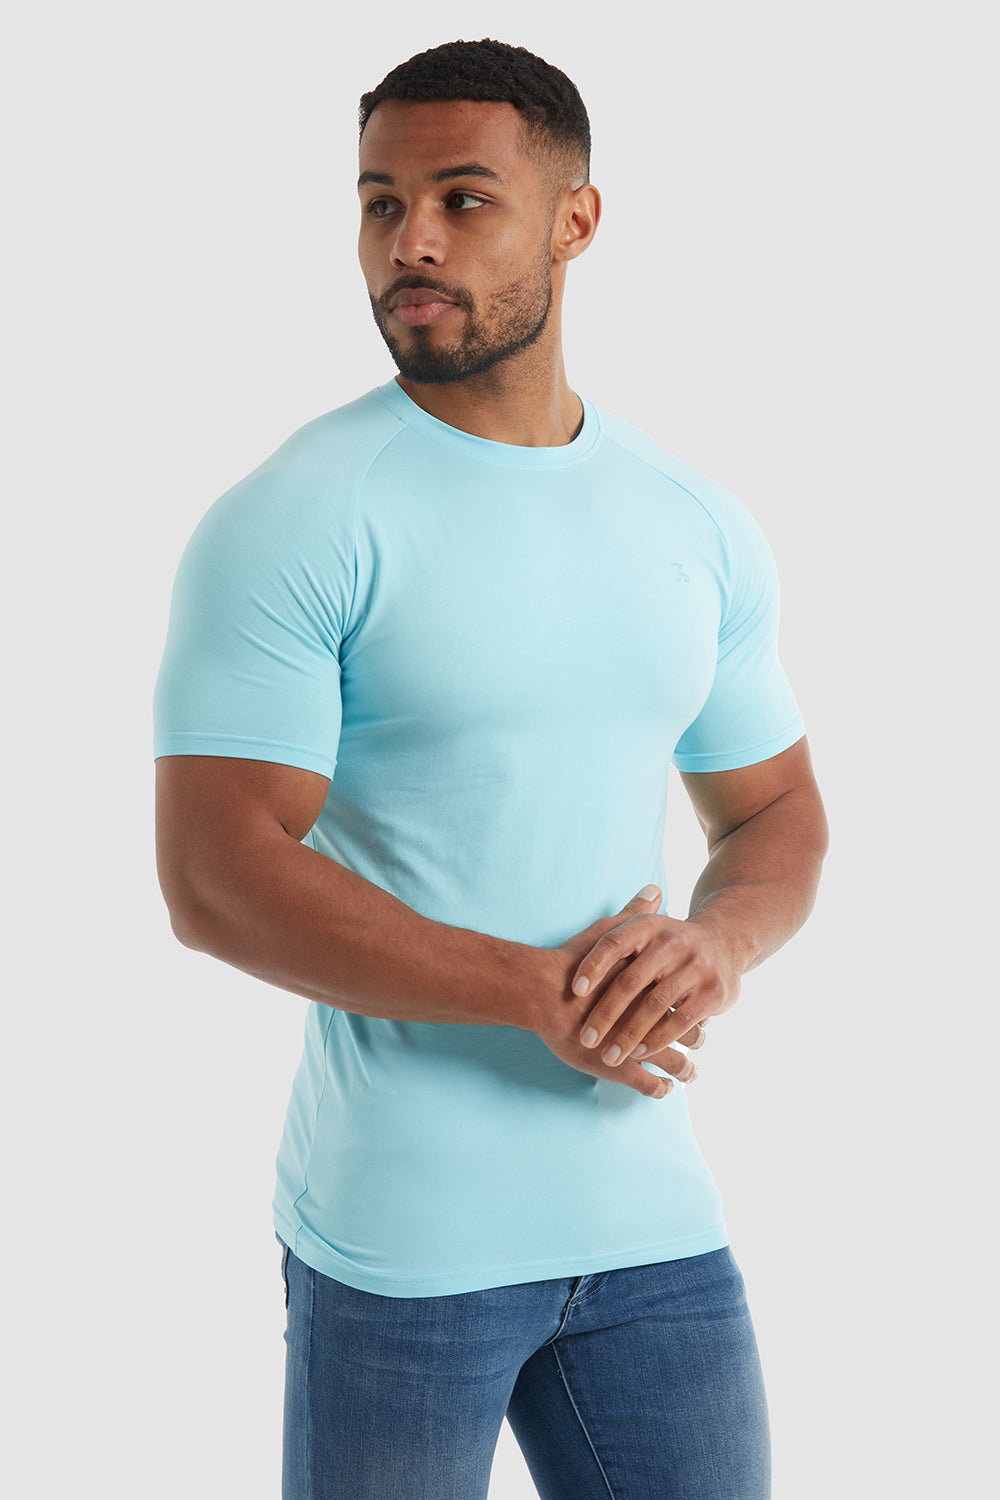 Muscle Fit T-Shirt in Sea Blue - TAILORED ATHLETE - ROW